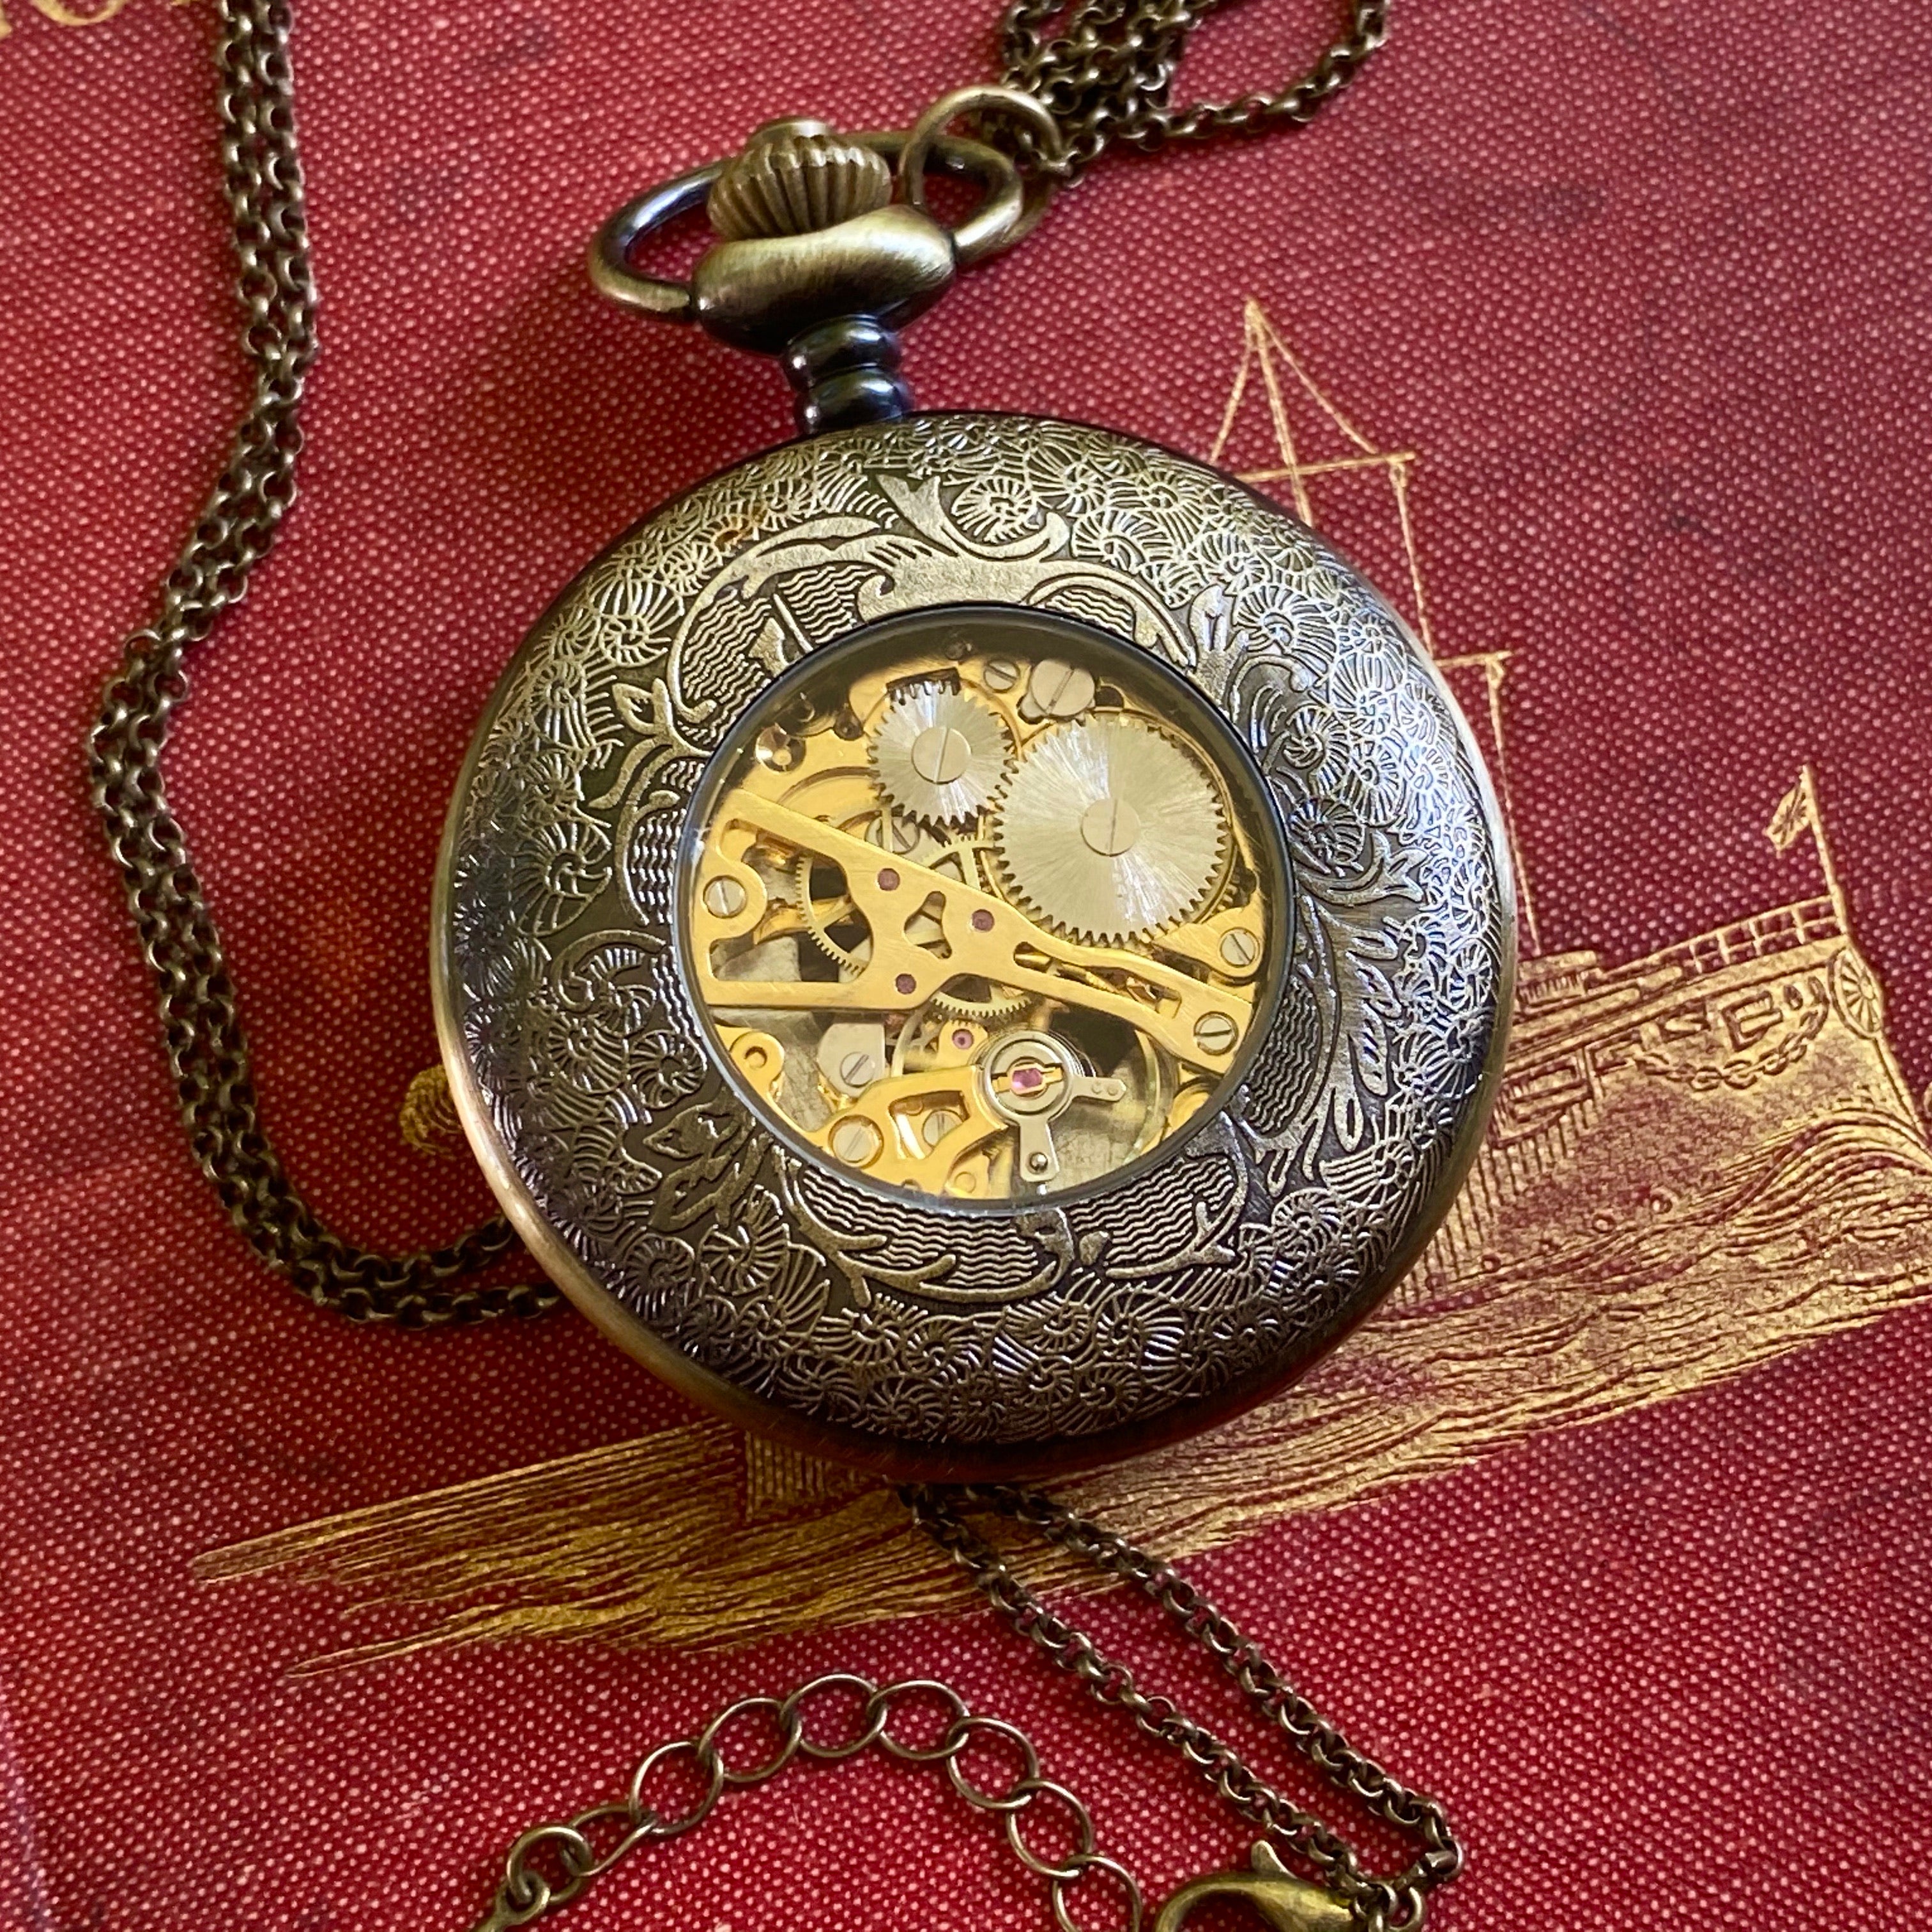 Mechanical Train Pocket Watch on Fob or Necklace Chain in Antiqued Bra ...